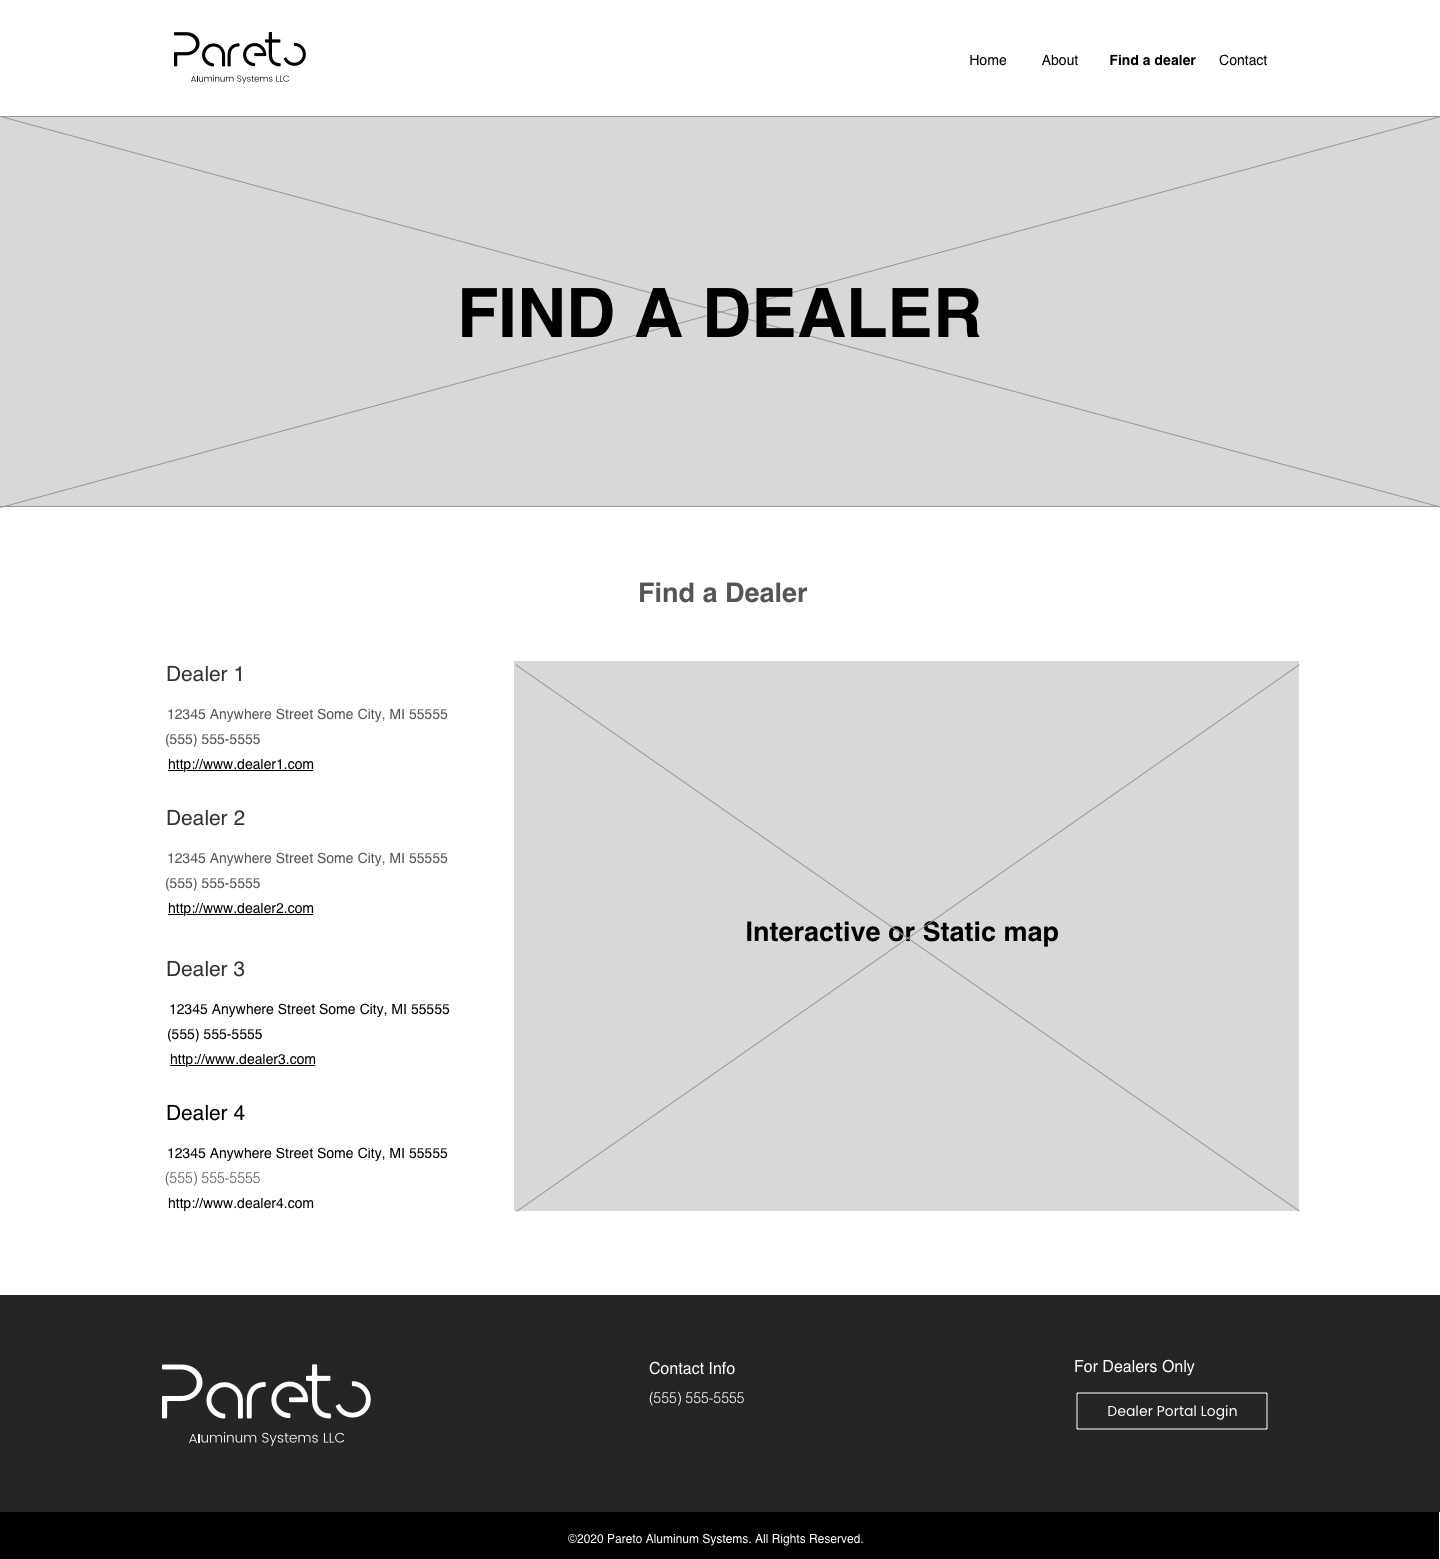 A desktop wireframe of Pareto's find a dealer page, which includes dealership info in various parts of the US and a map image placeholder.